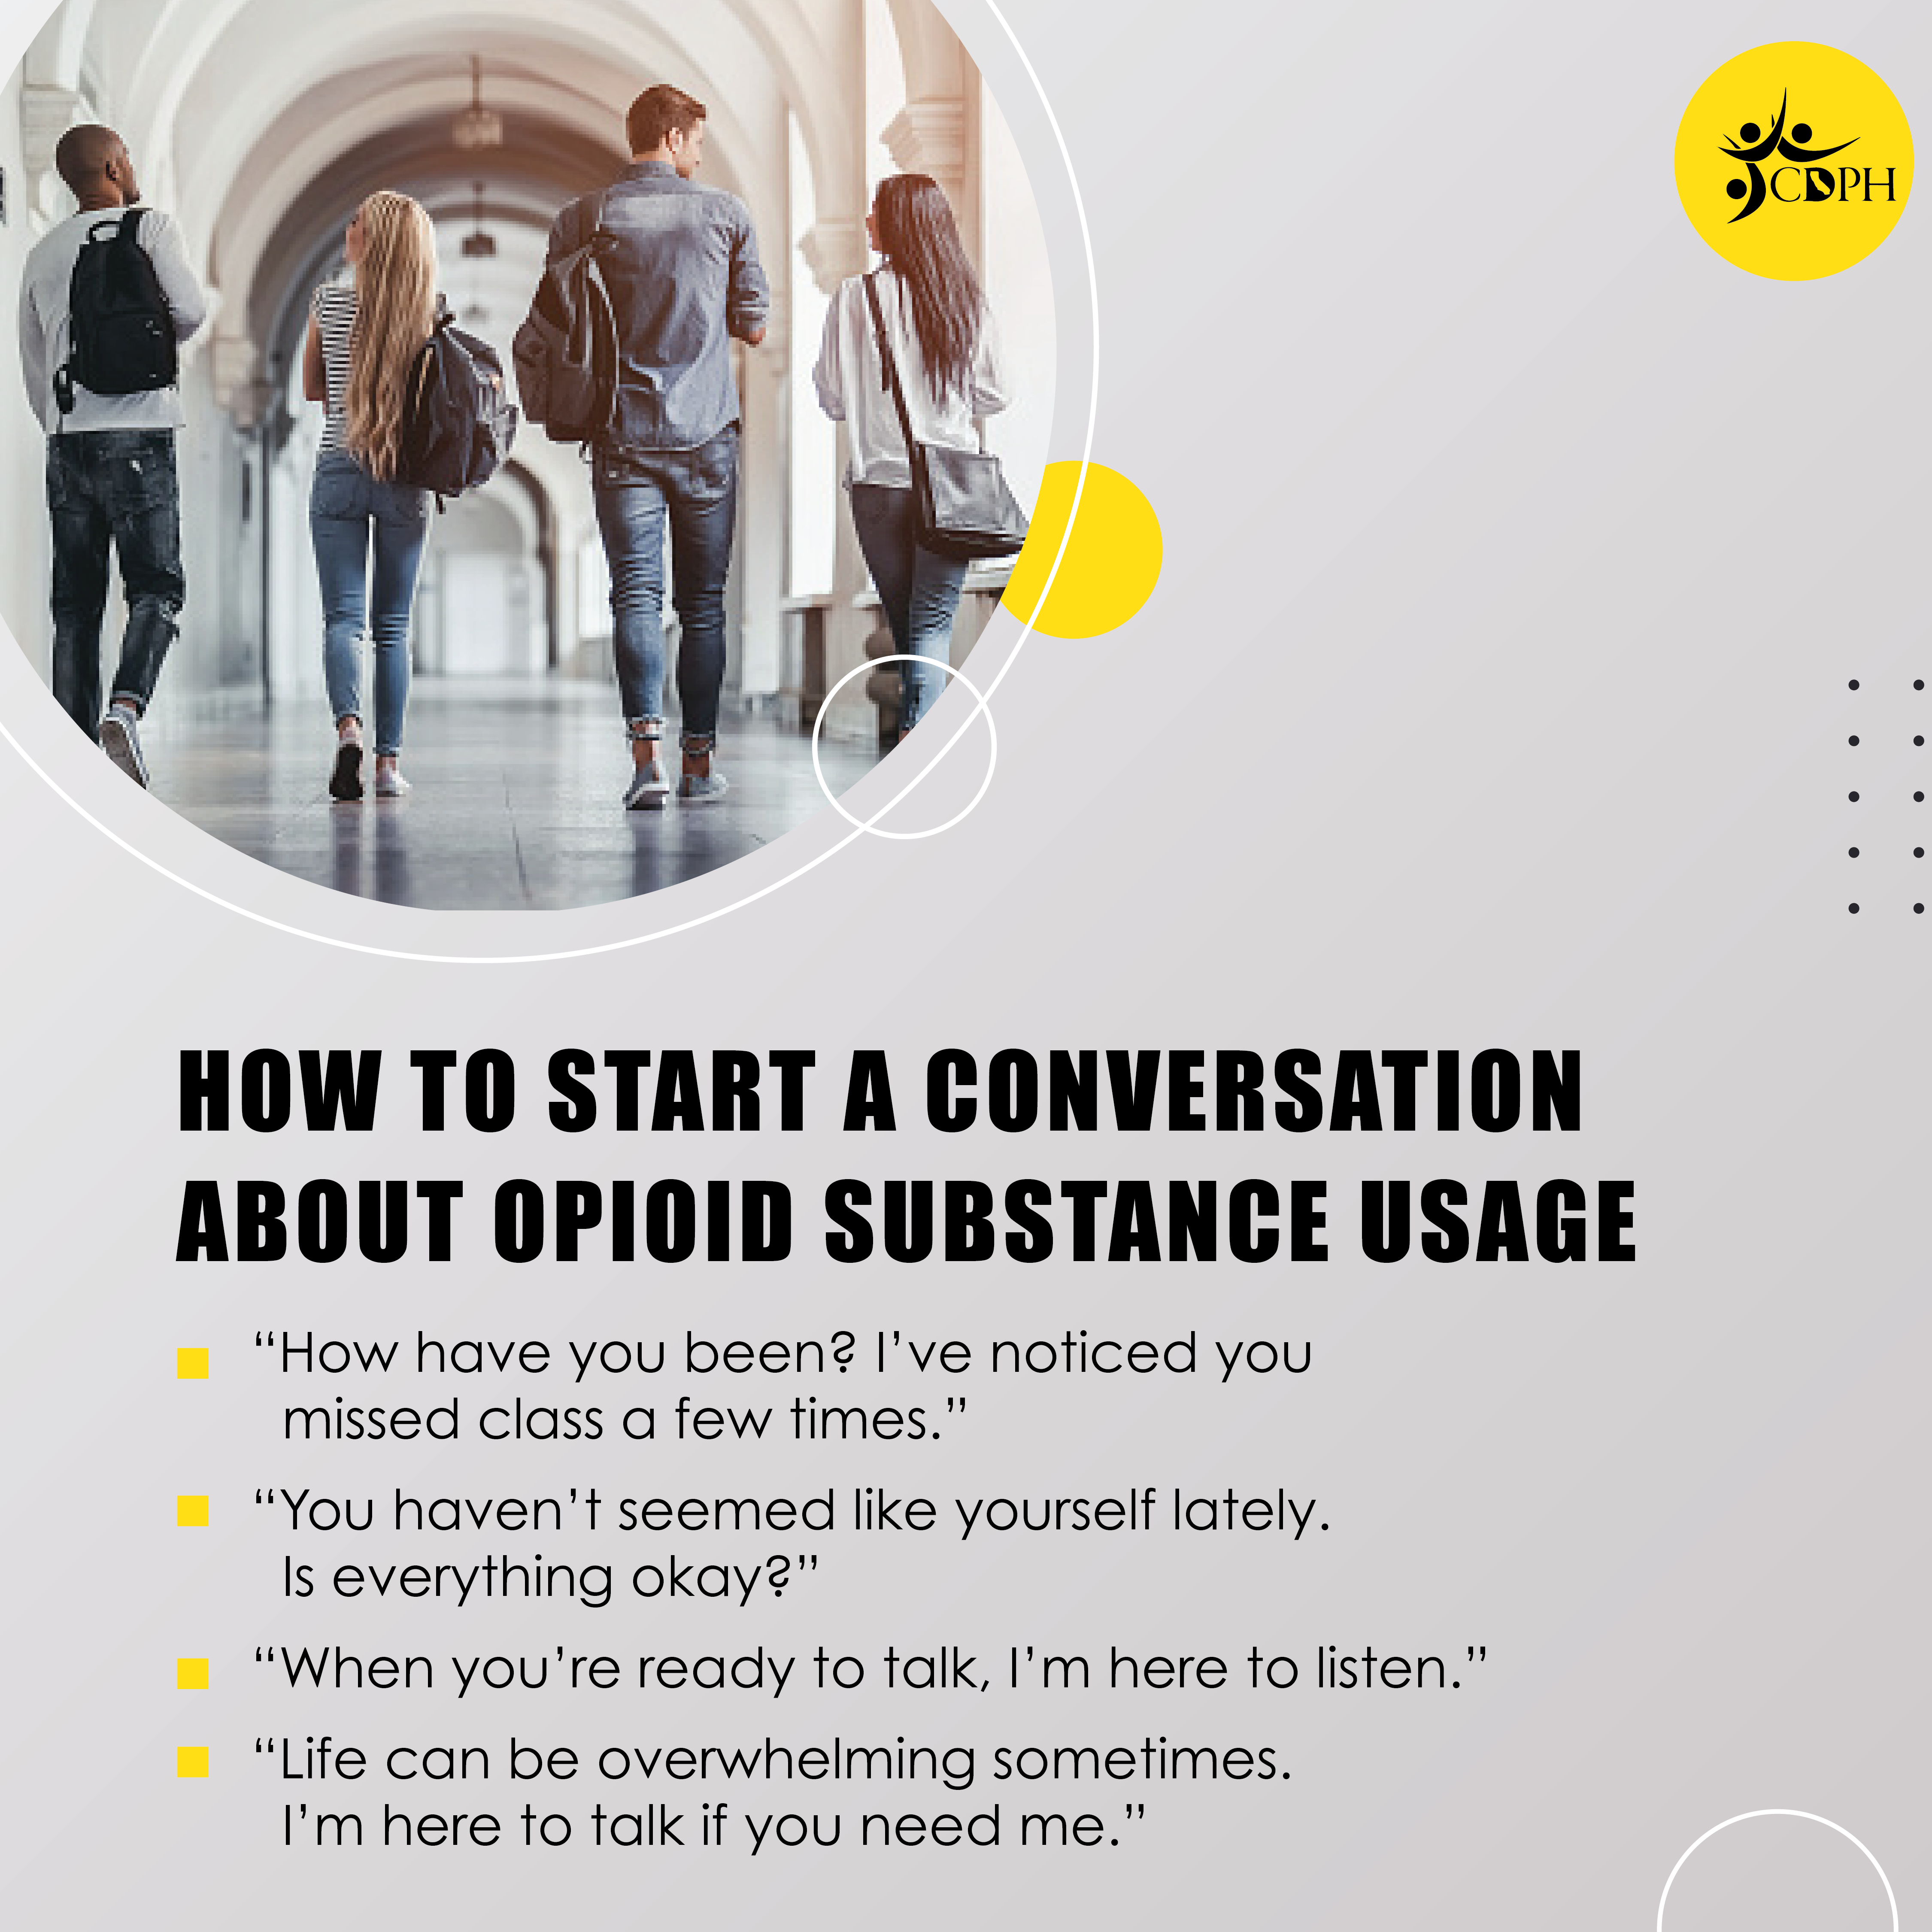 How to stqart a conversion about opioid substance usage